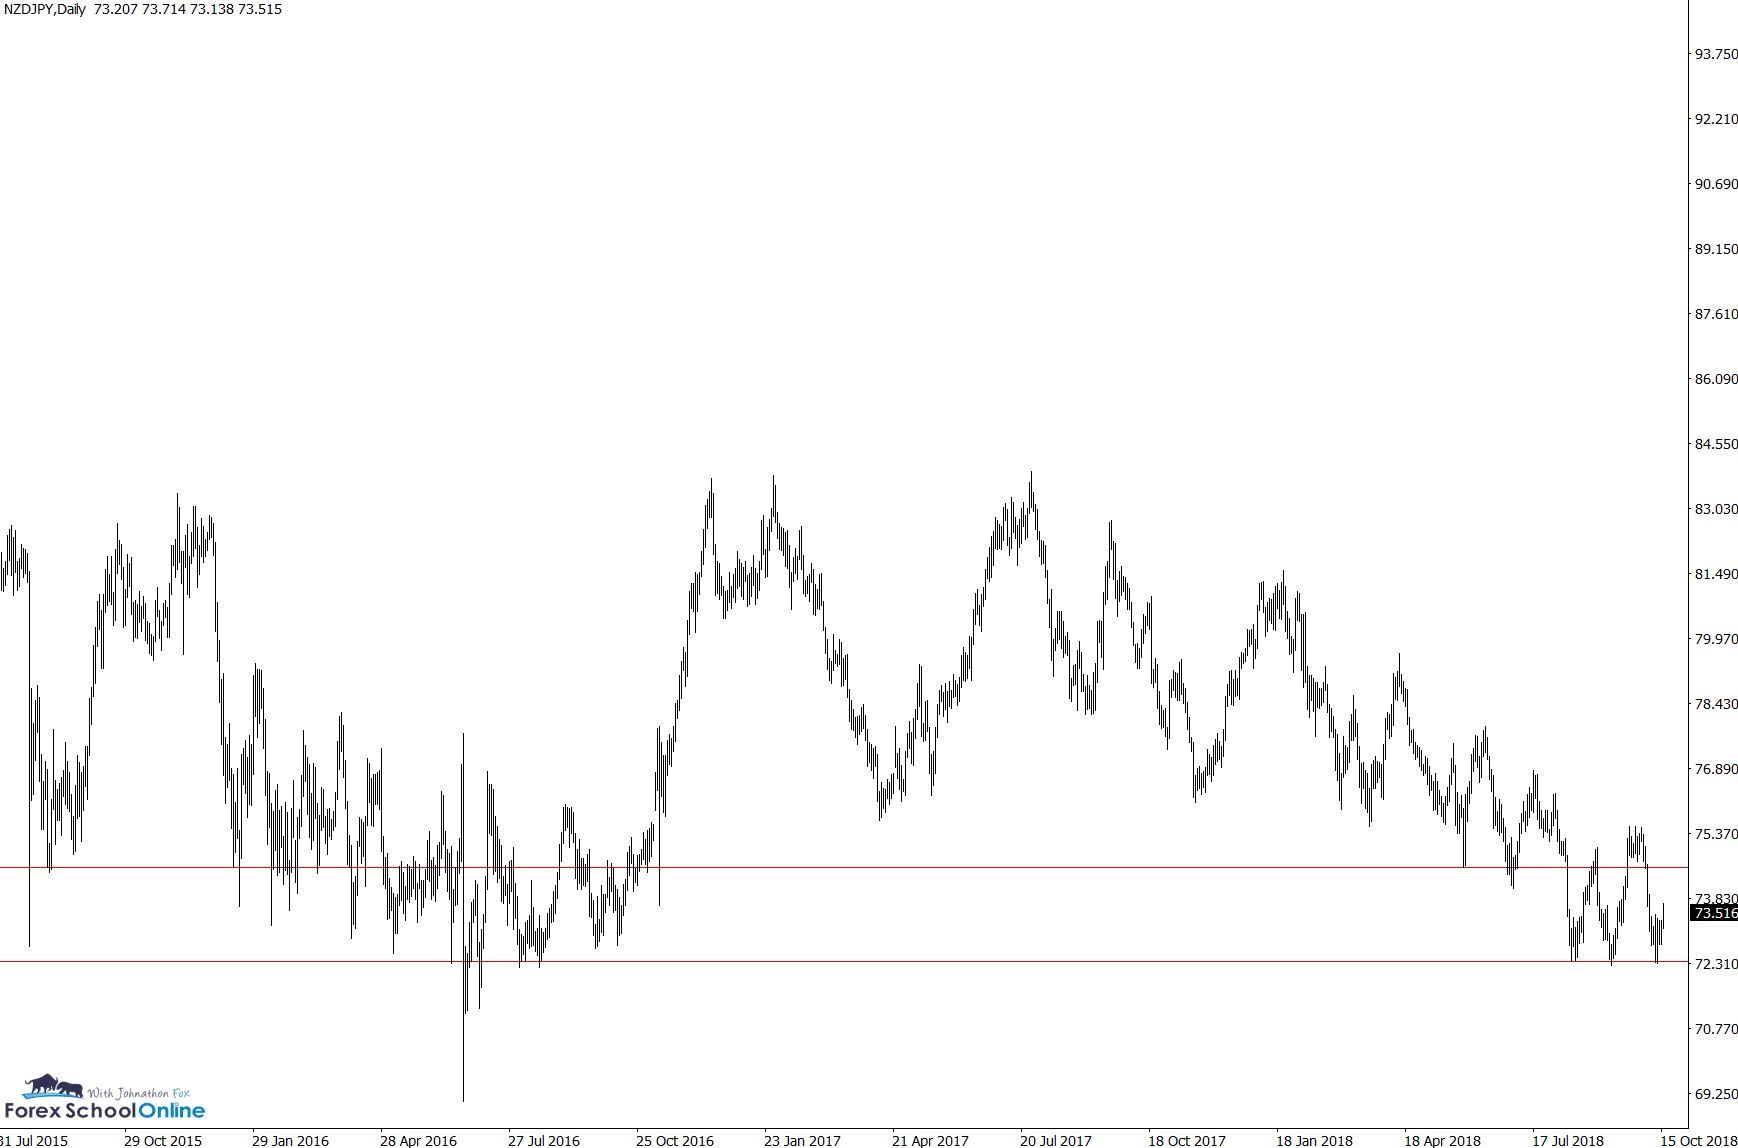 nzdjpy zoomed out